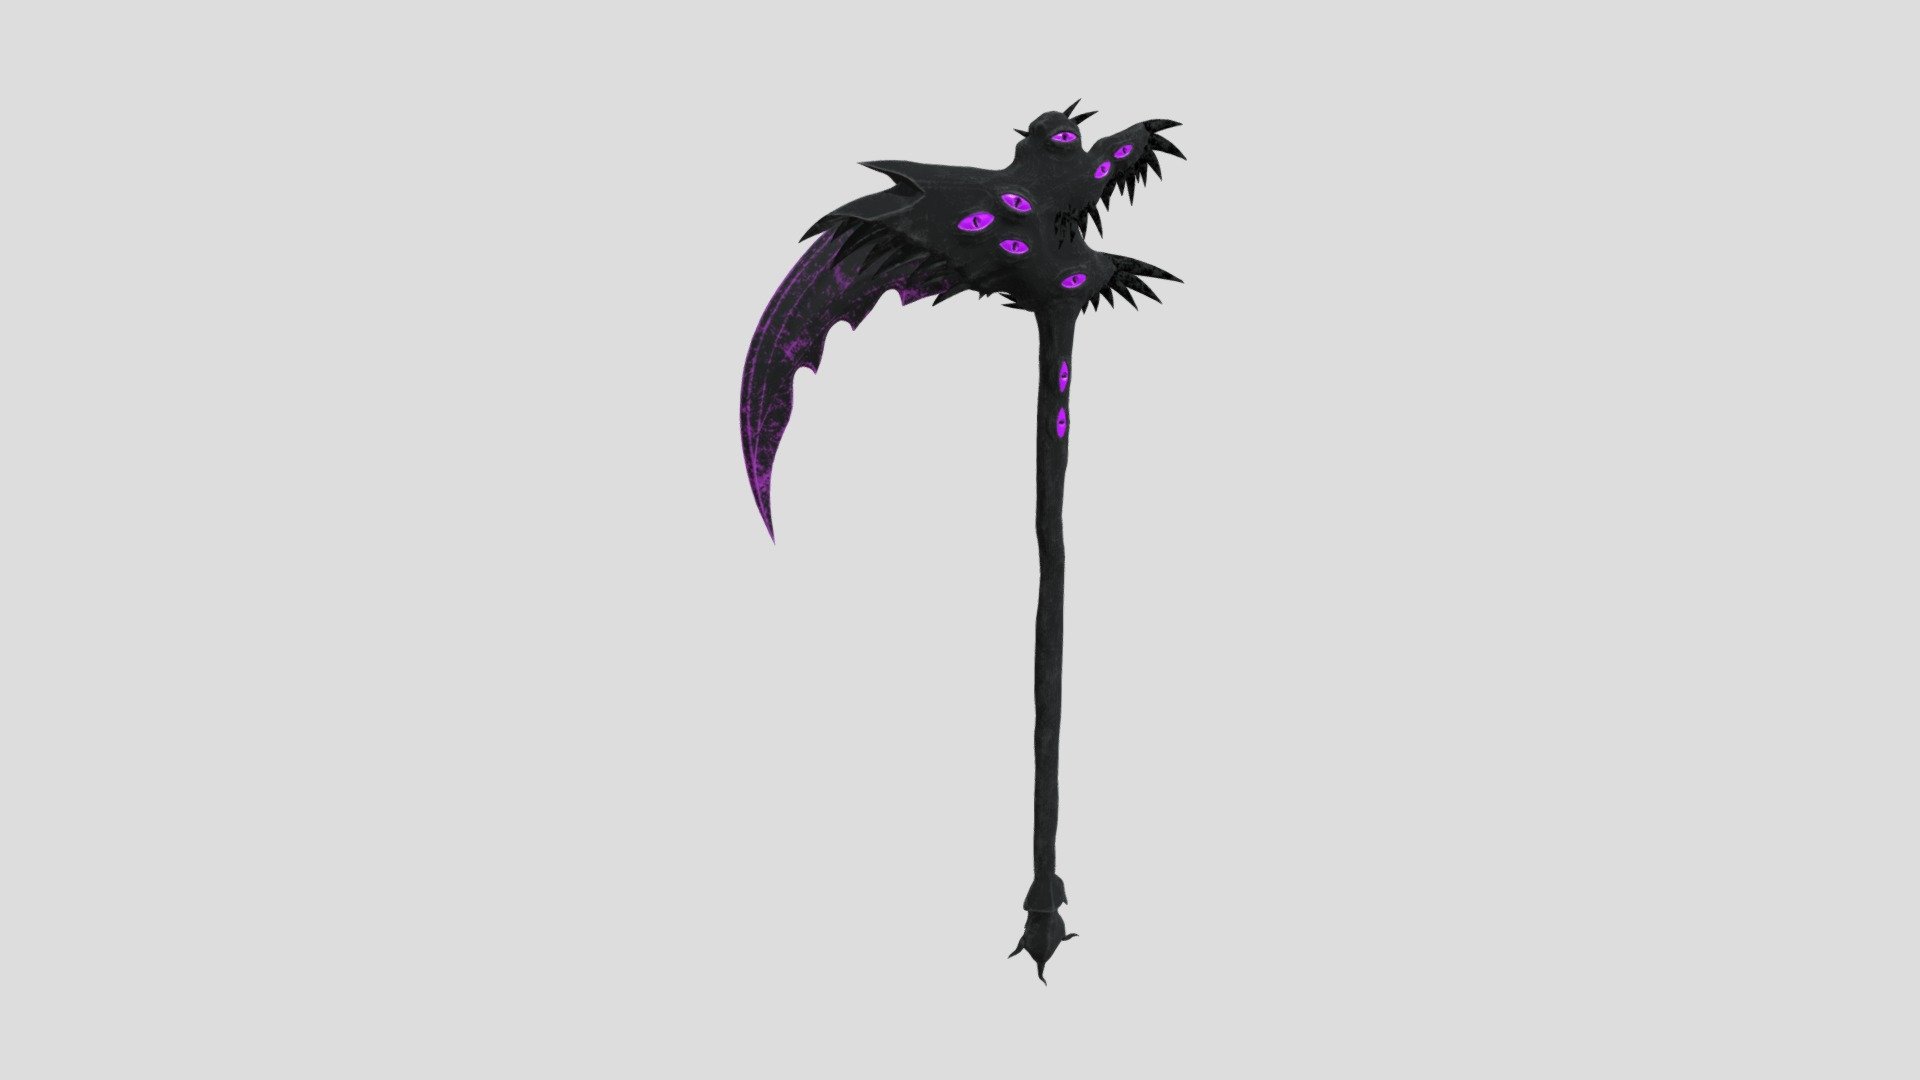 The scythe of death from the game “Terraria” 3d model